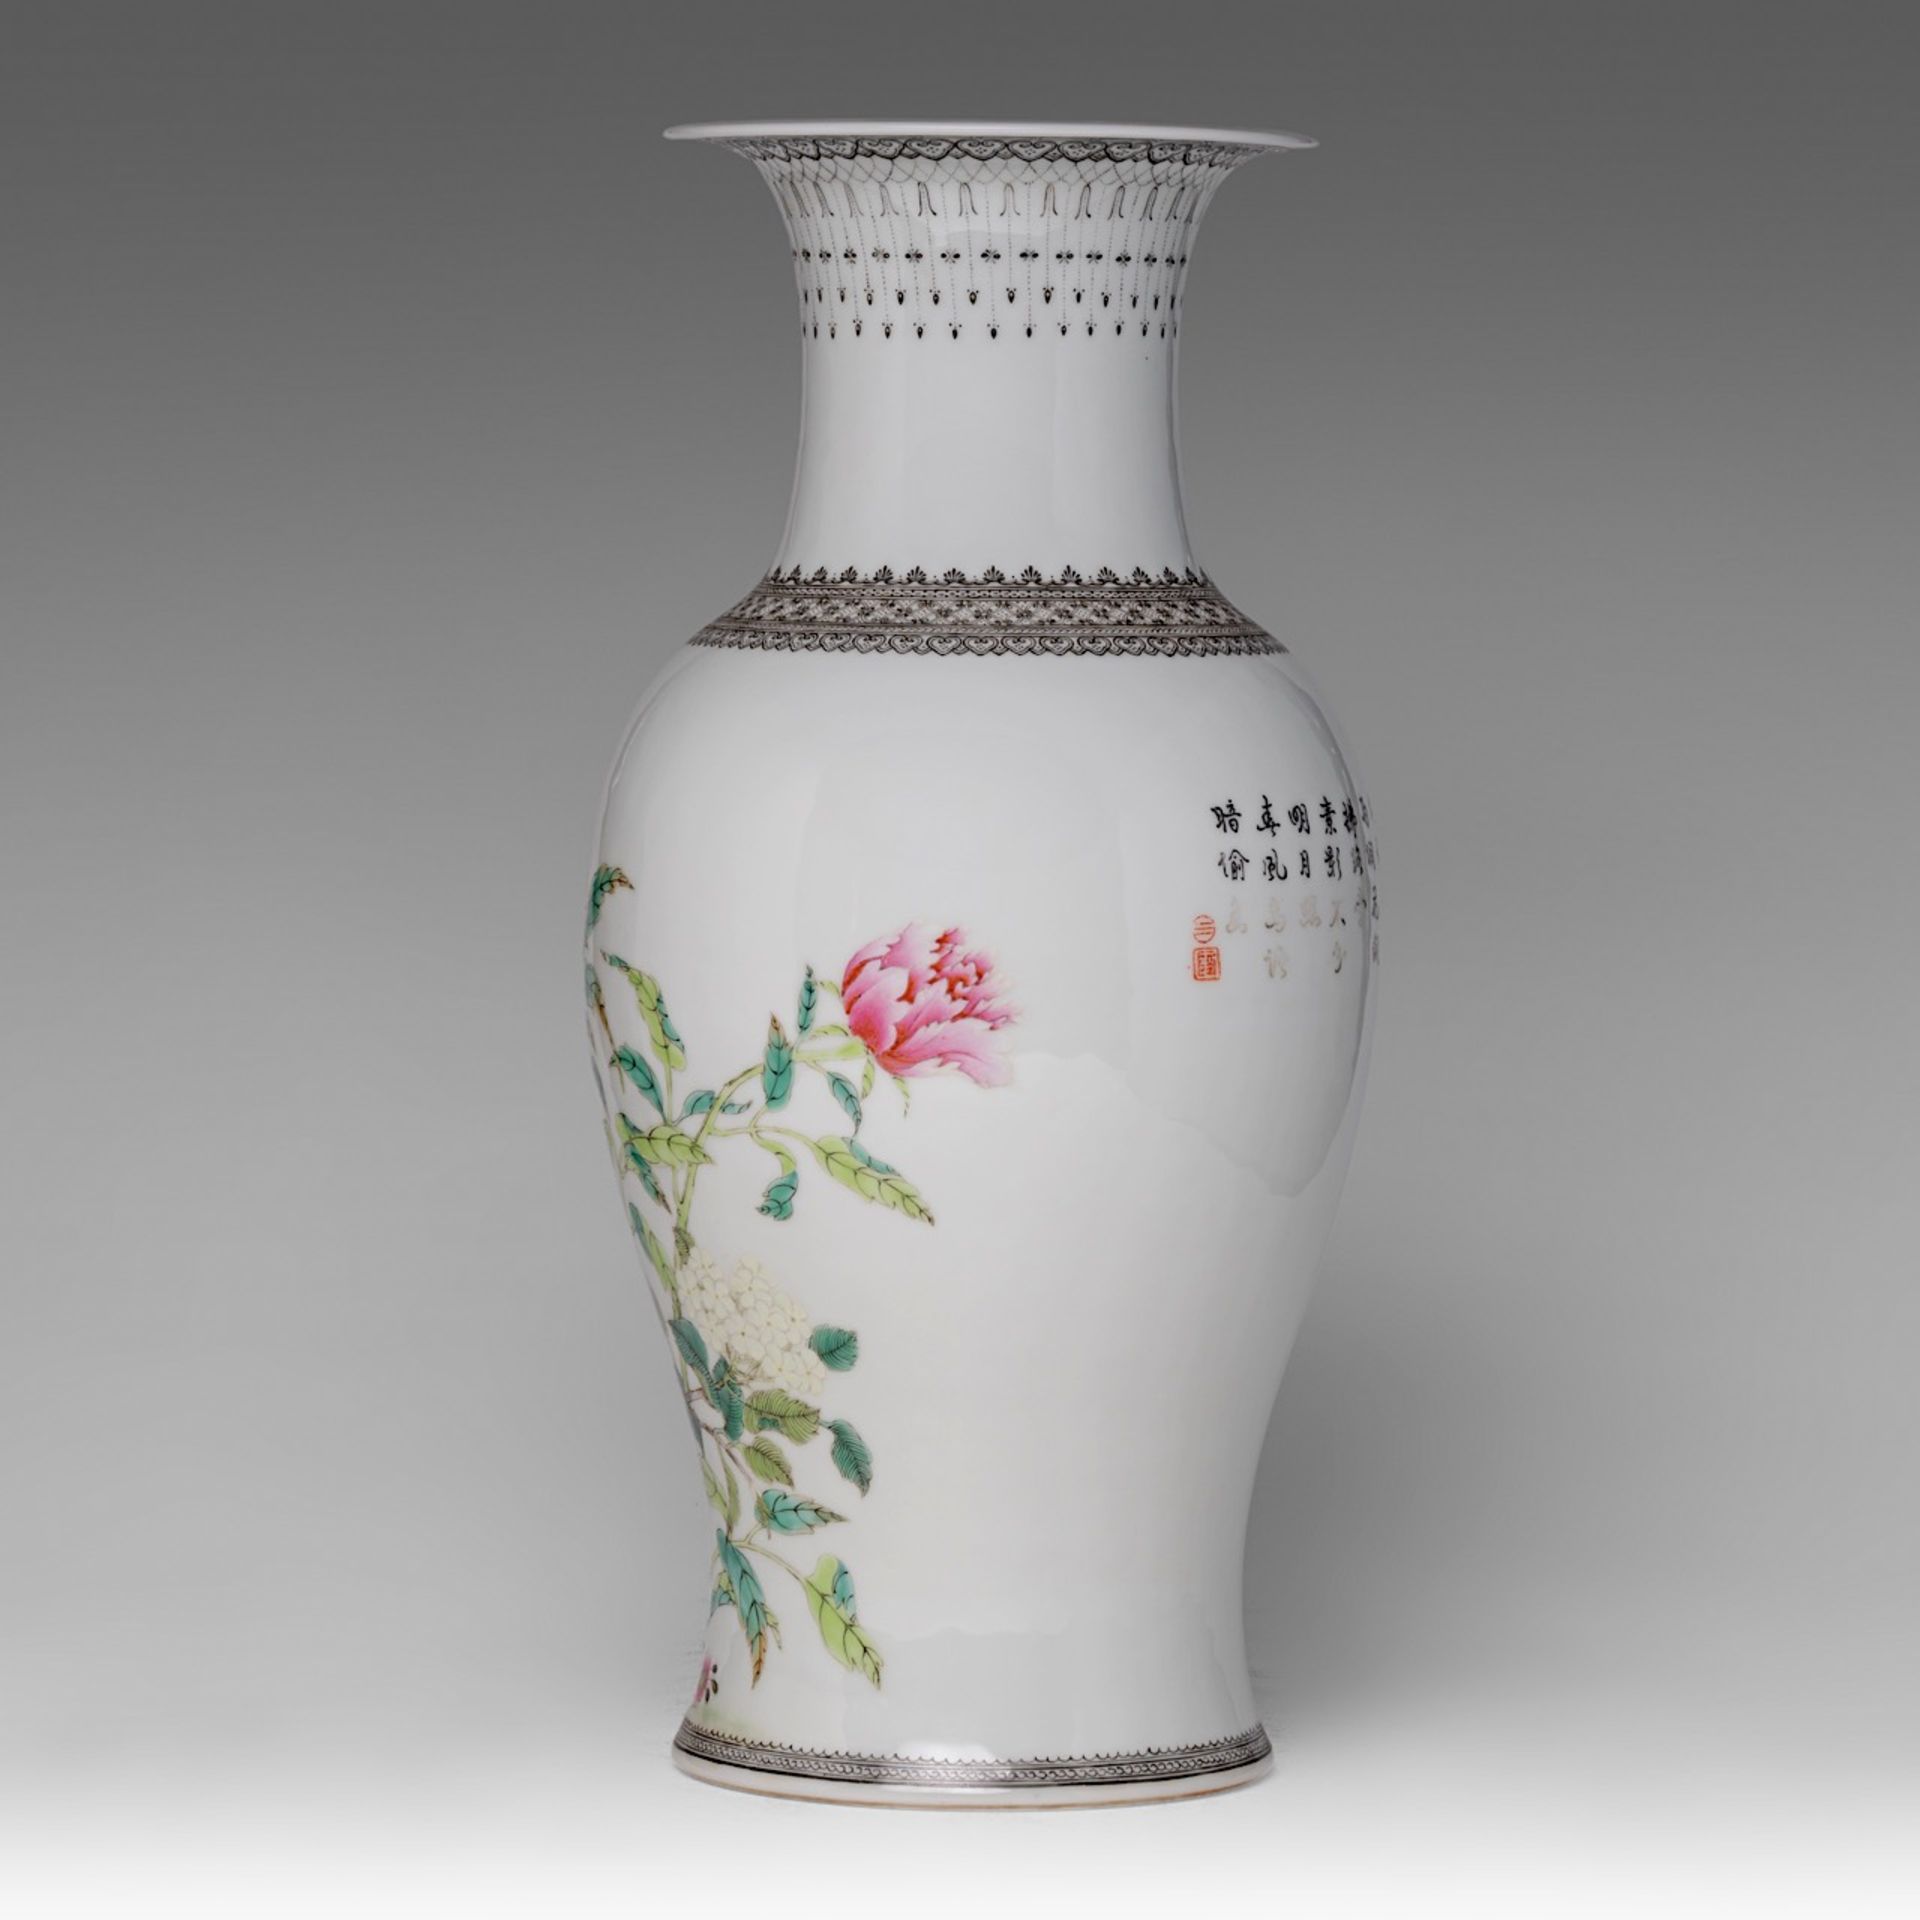 A Chinese famille rose 'Magpies in a Lotus Garden' vase, the back with a signed text, 20thC, H 41,3 - Image 3 of 6